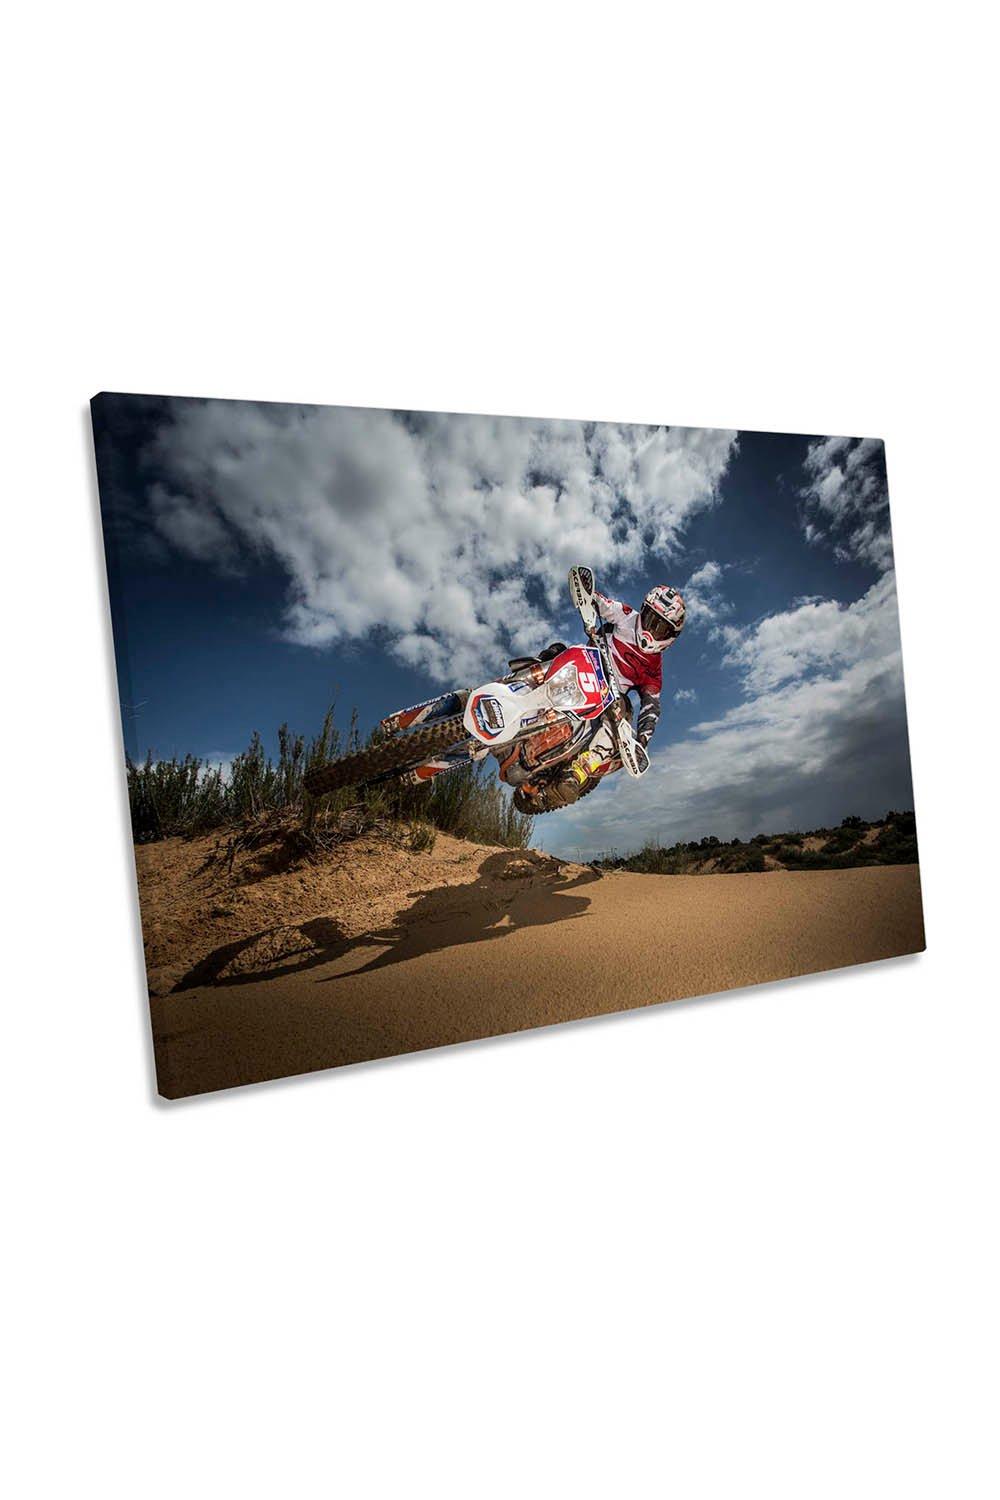 Motor Cross Bike Action Sports Canvas Wall Art Picture Print